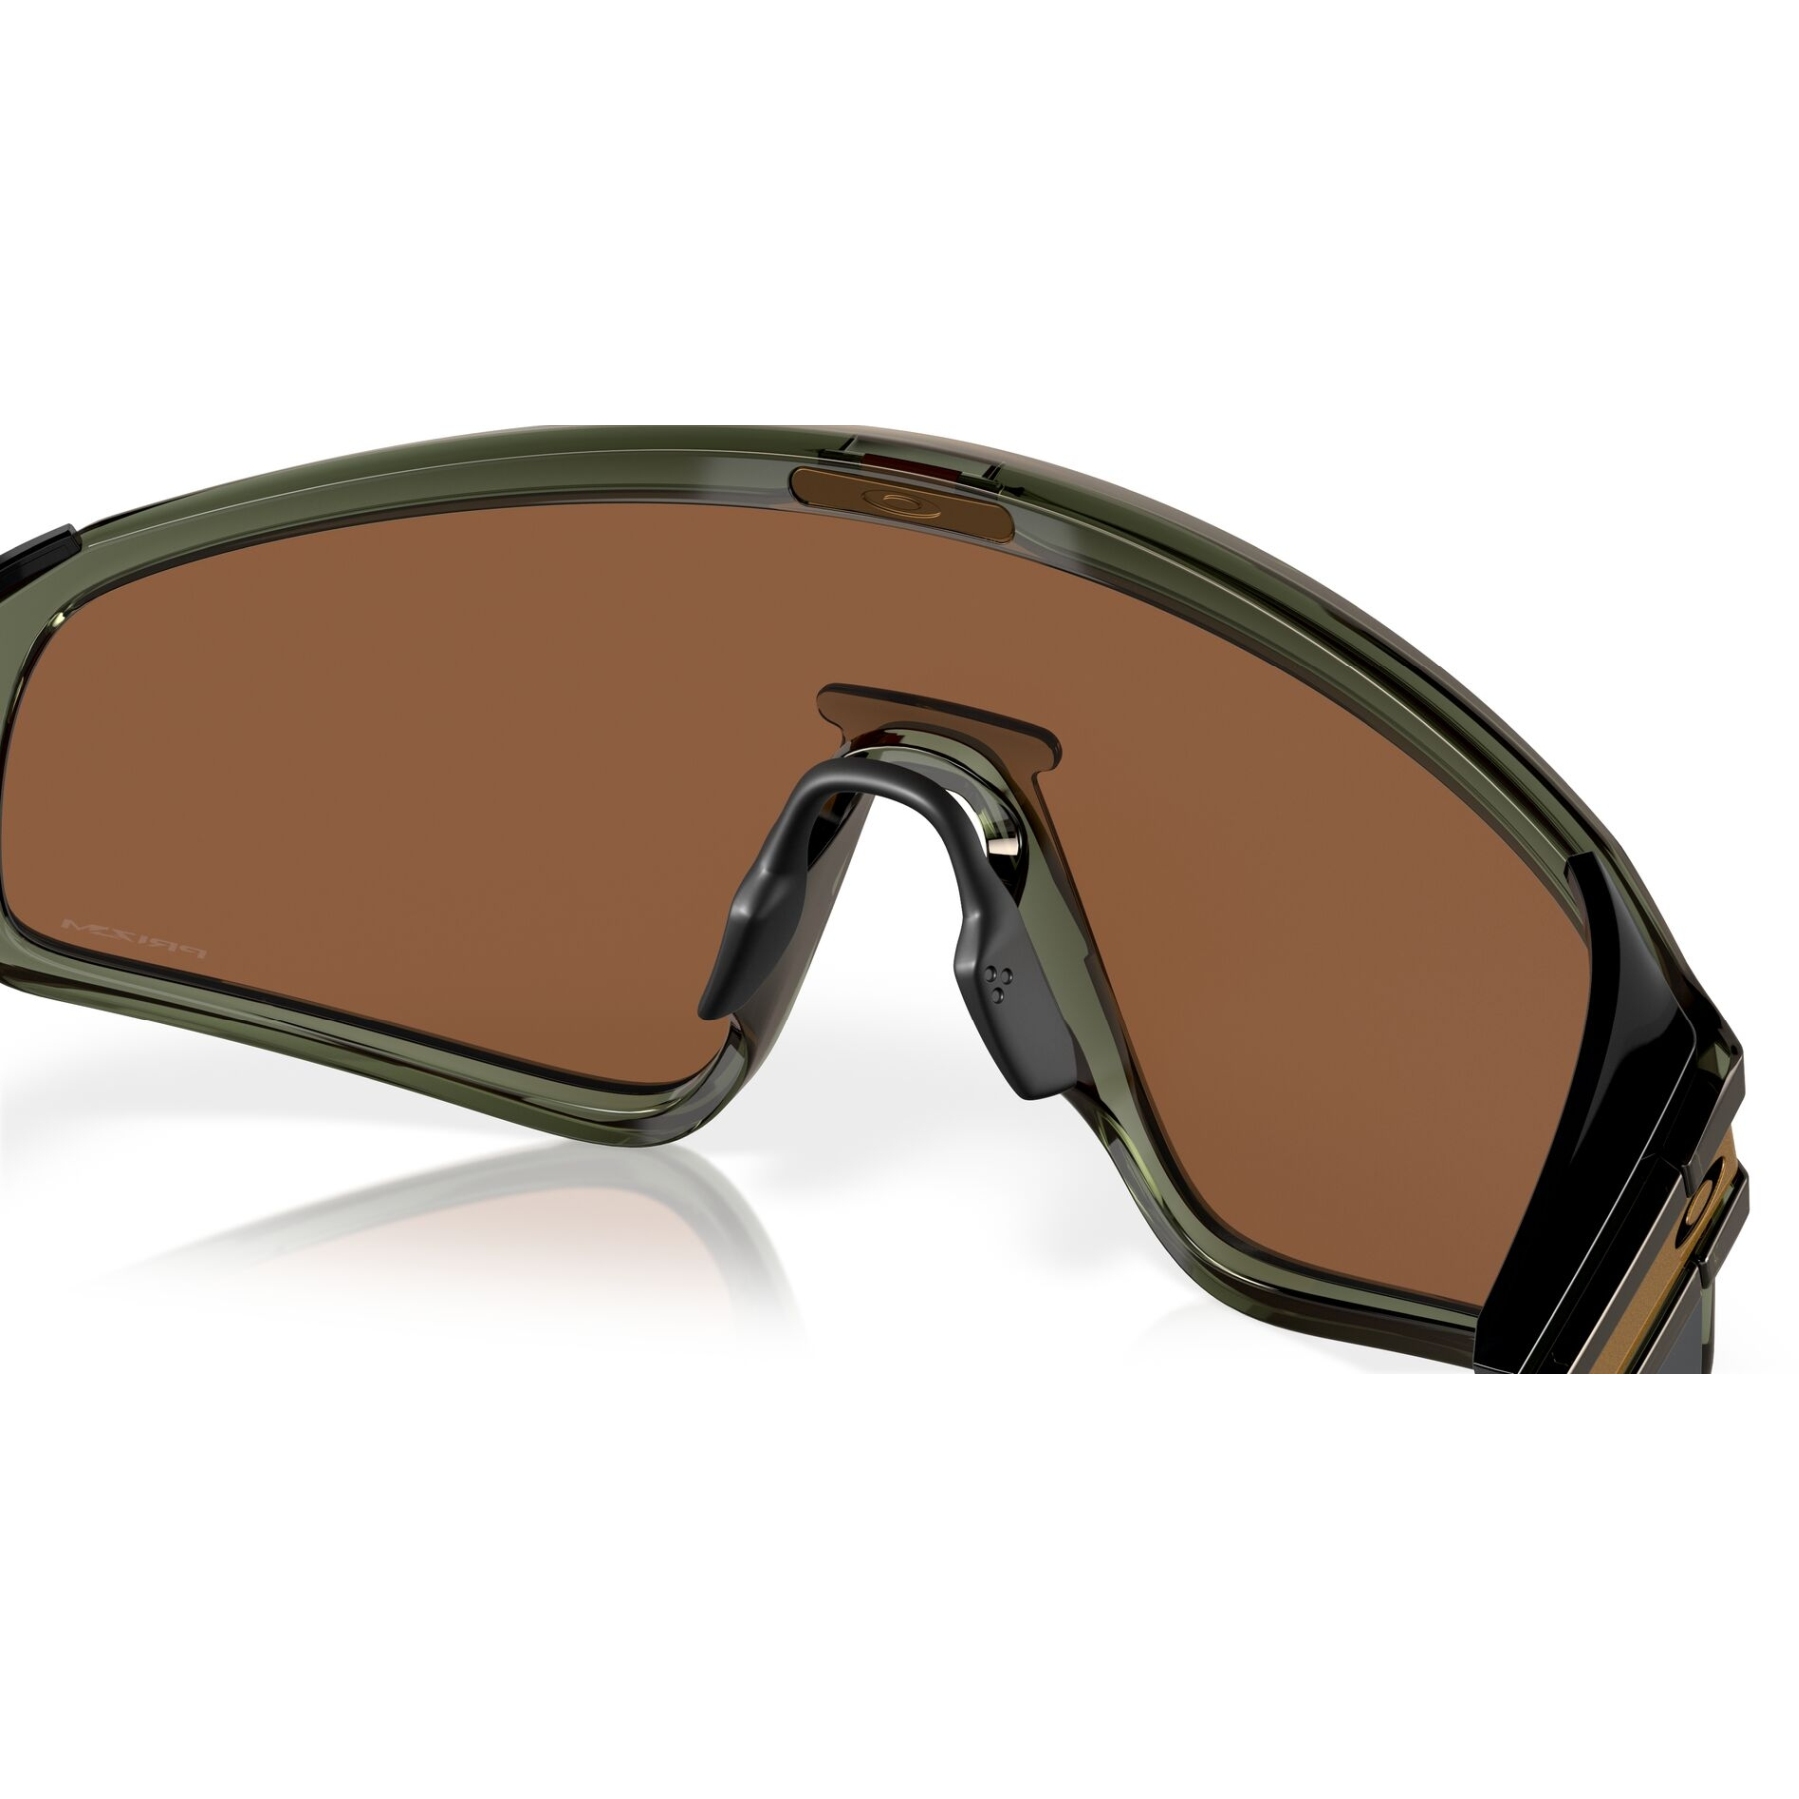 Oakley Latch Panel Glasses - Olive Ink/Prizm Tungsten - OO9404-0335